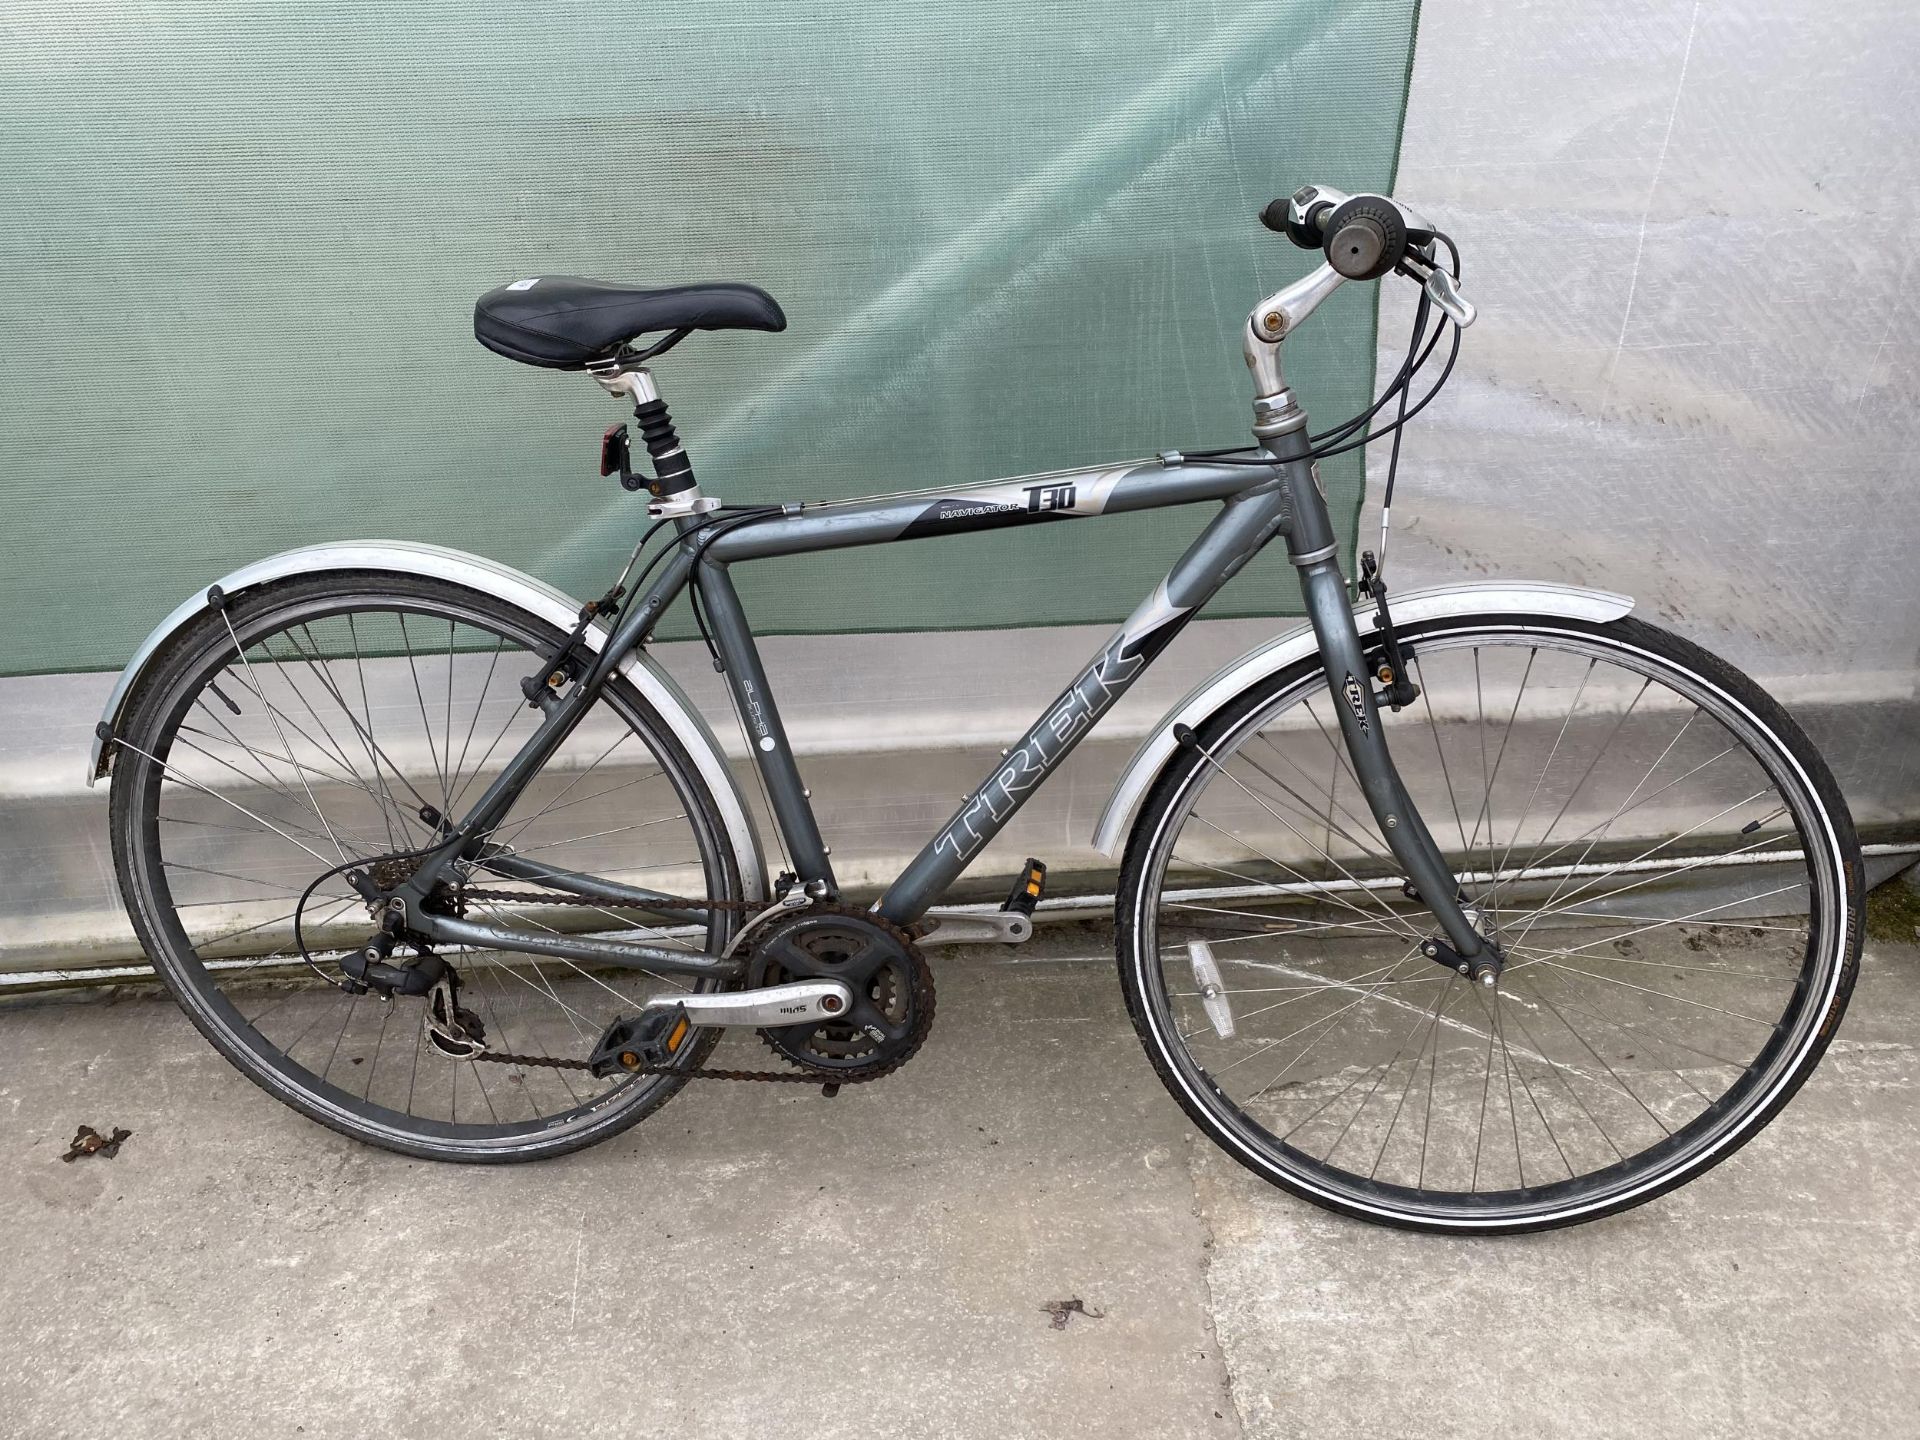 A GENTS TREX NAVIGATOR BIKE WITH 18 SPEED SHIMANO GEAR SYSTEM